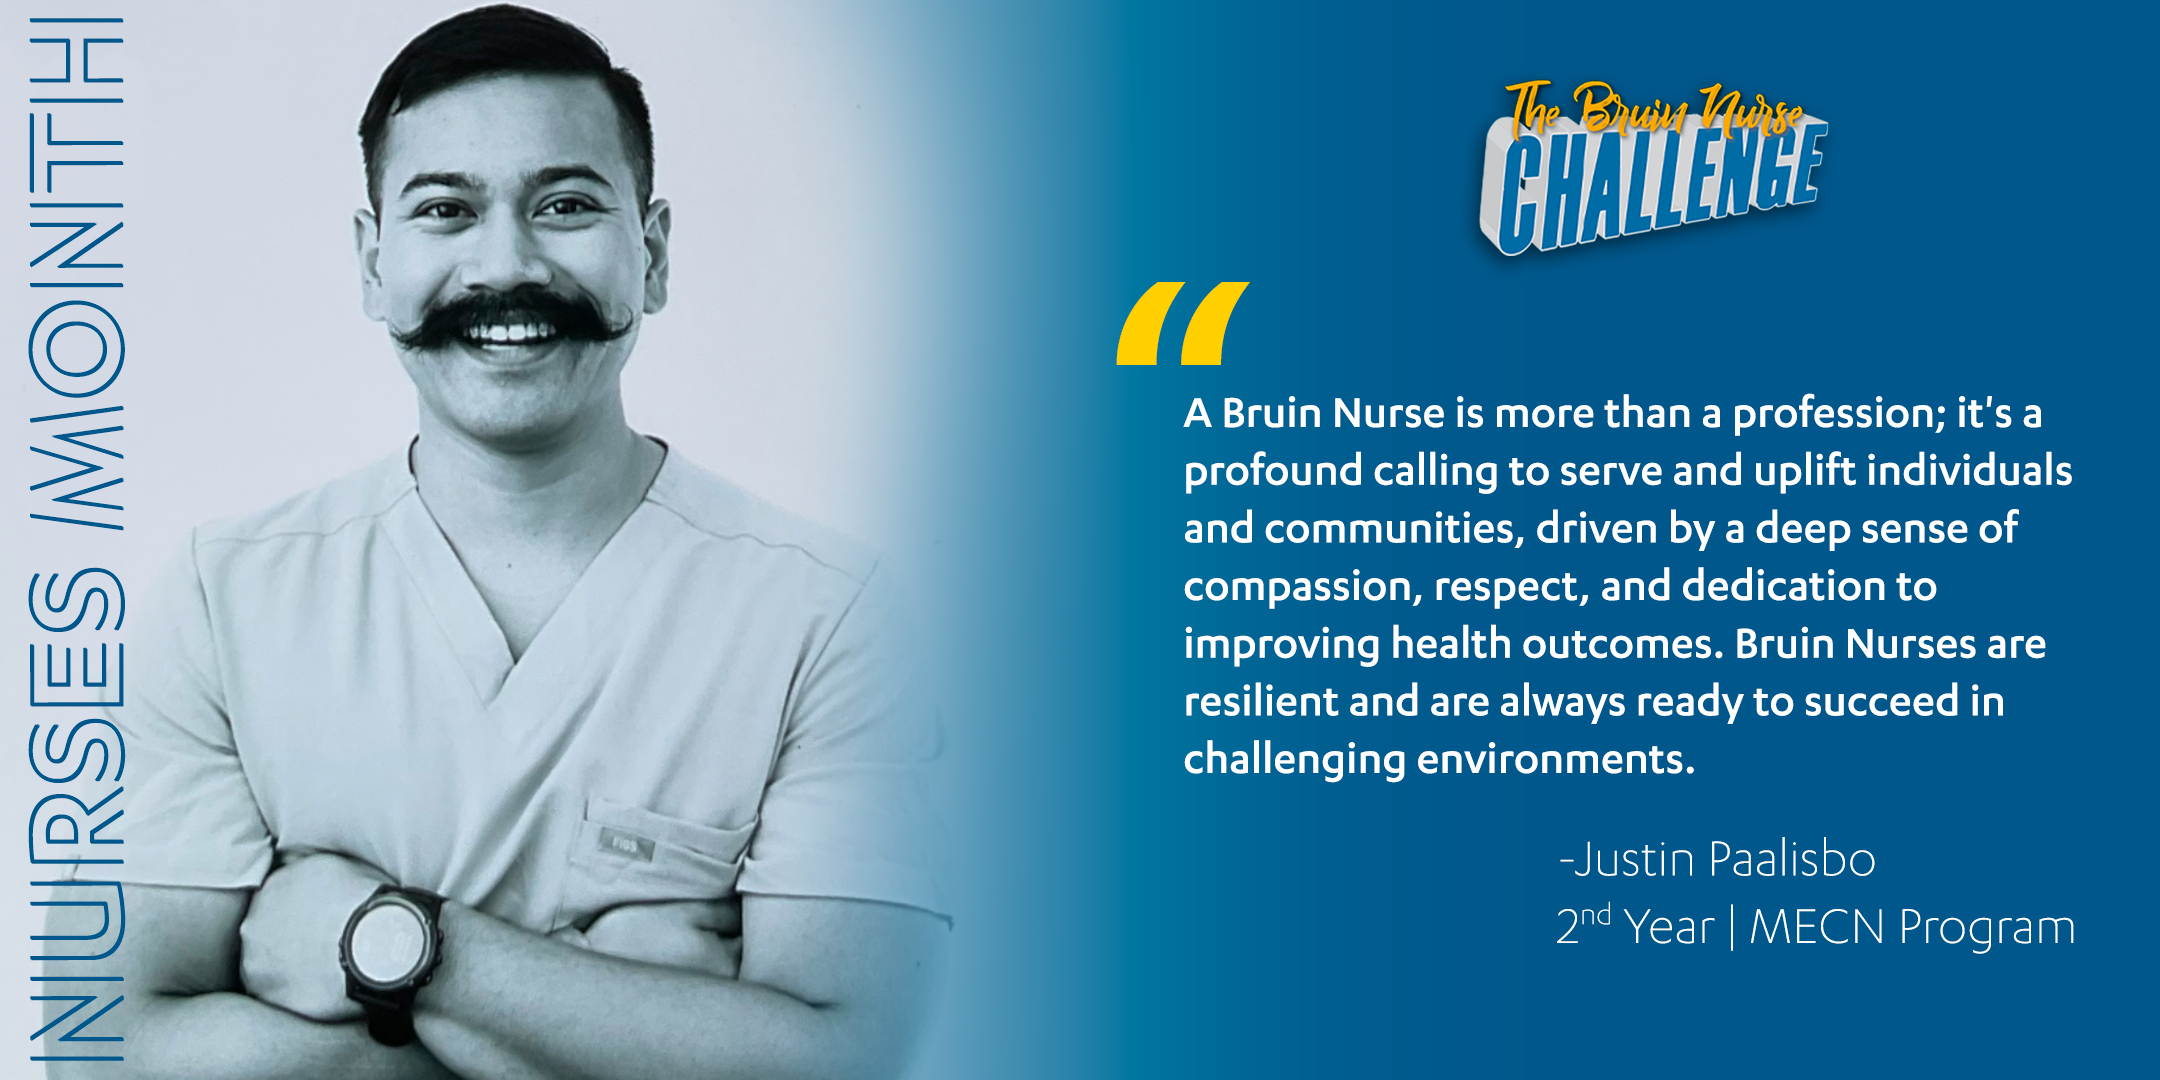 Bruin Nurse Challenge graphic featuring Justin Paalisbo's quote, "A Bruin Nurse is more than a profession; it's a profound calling to serve and uplift individuals and communities, driven by a deep sense of compassion, respect, and dedication to improving health outcomes. Bruin Nurses are resilient and are always ready to succeed in challenging environments."